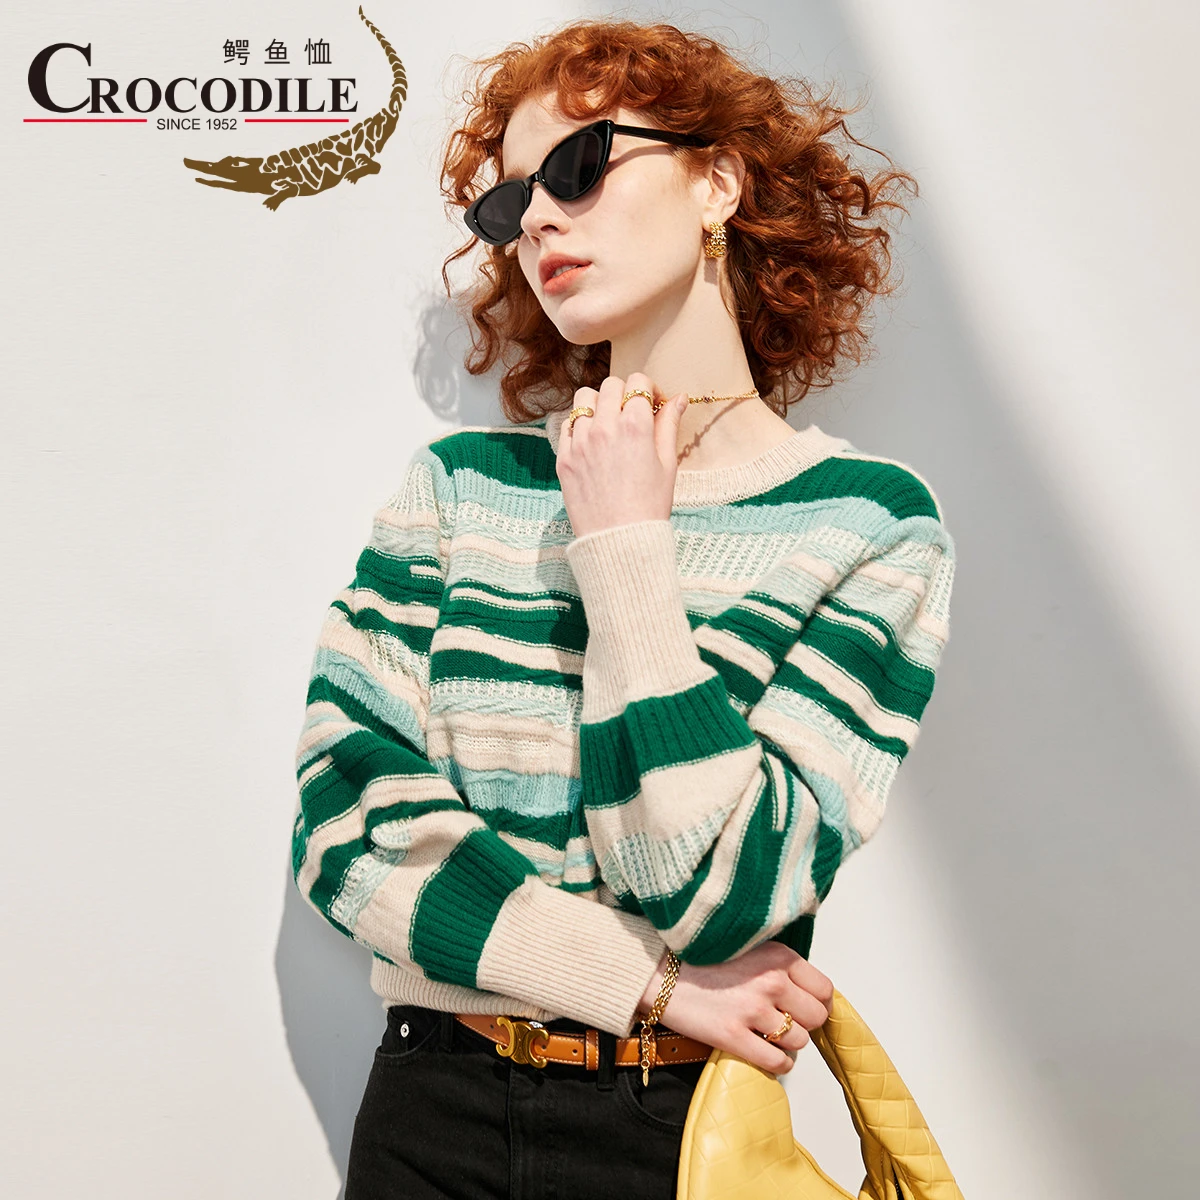 

Crocodile New-Coming Winter Clothes Women Color Spliced Stripes Sweater Round Neck Comfortable Soft Knitwear Loose Pullover Tops